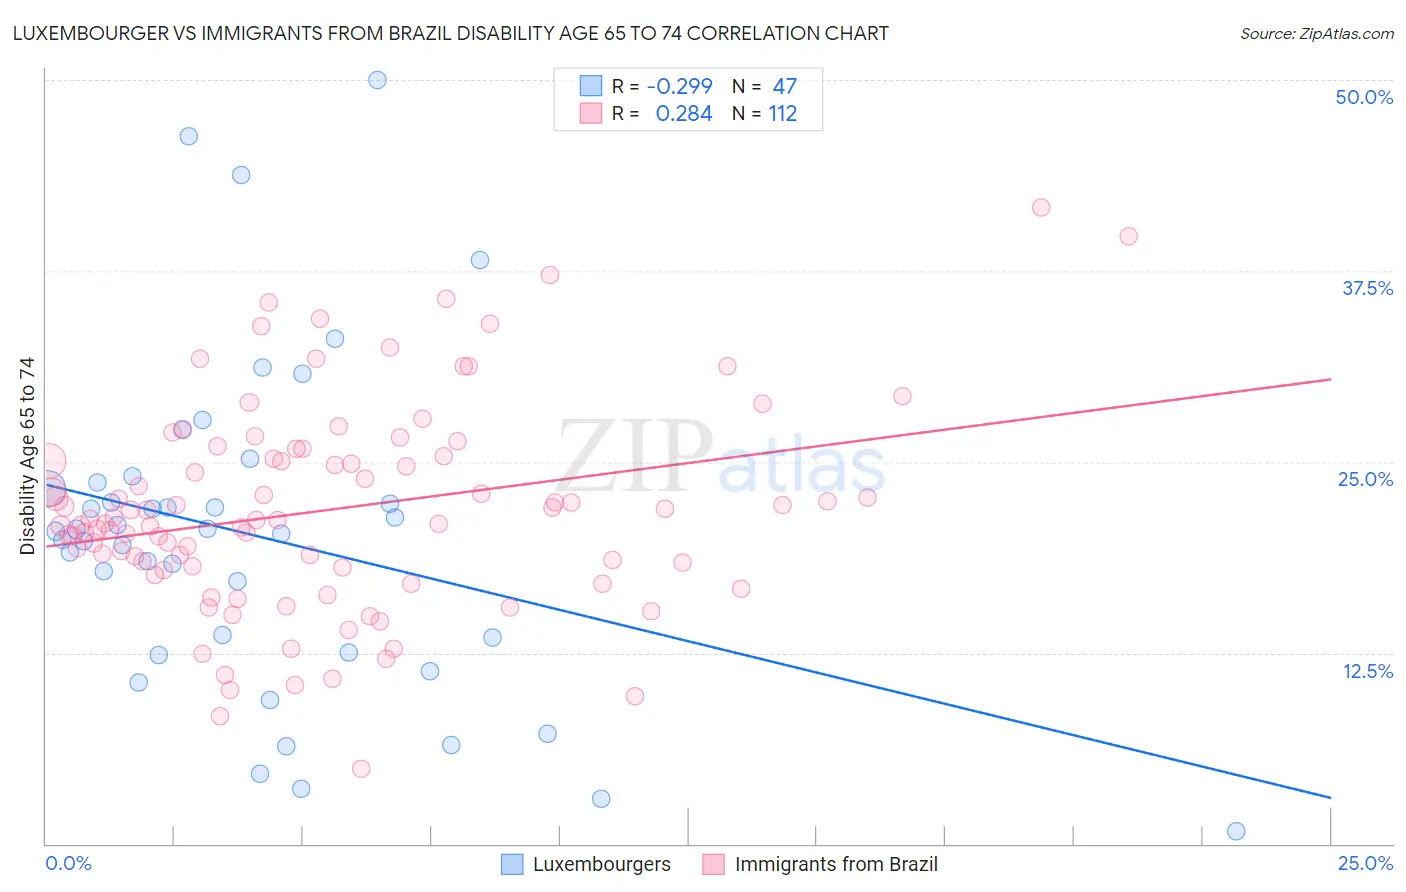 Luxembourger vs Immigrants from Brazil Disability Age 65 to 74